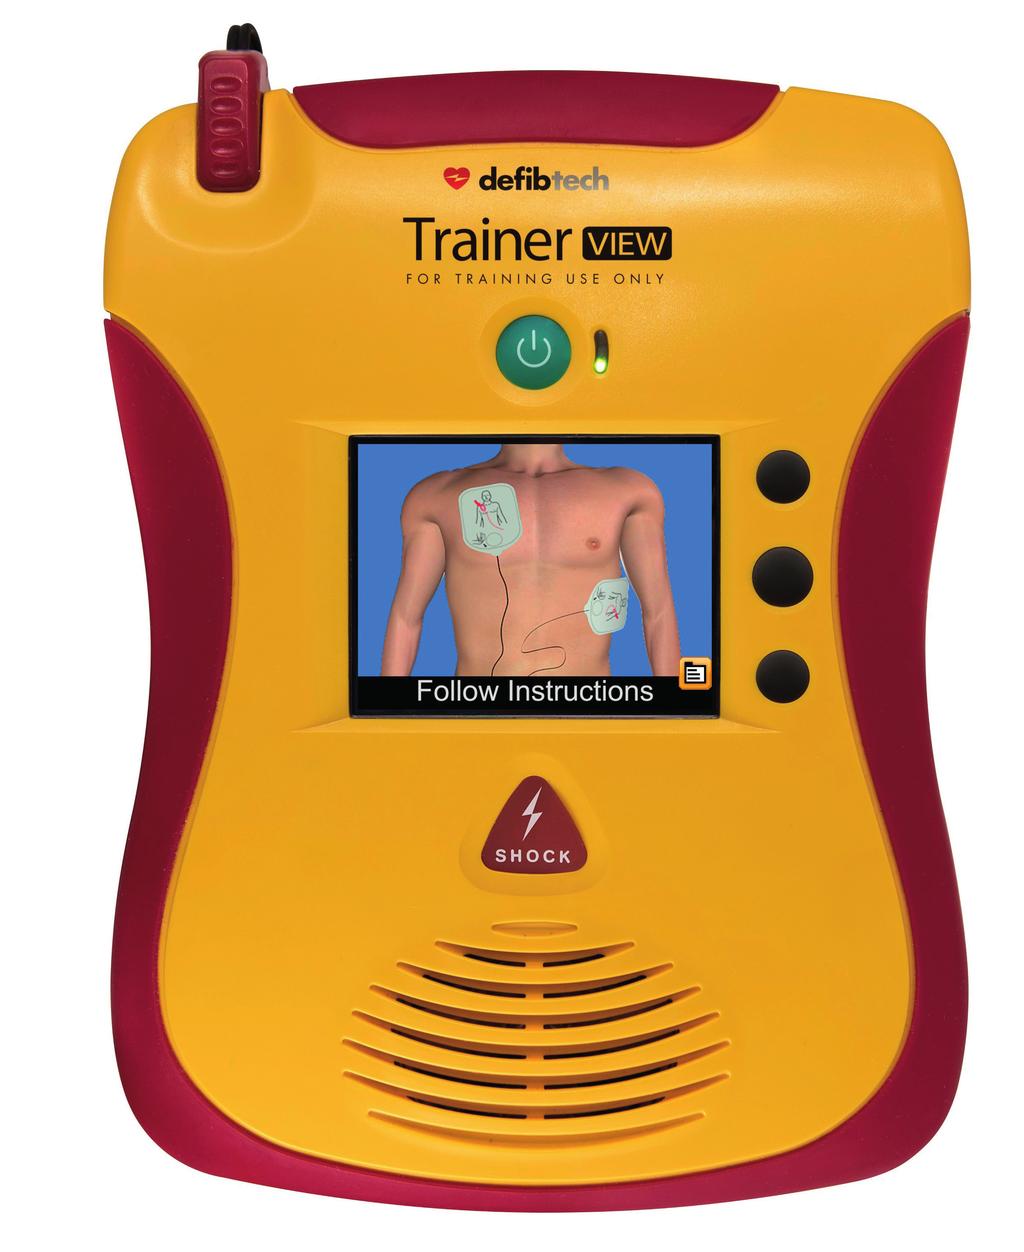 SELF-CONTAINED UNIT SPECIFICALLY USED FOR TRAINING Trainer AED & Trainer VIEW Stand-Alone Training Units The Training AED is a